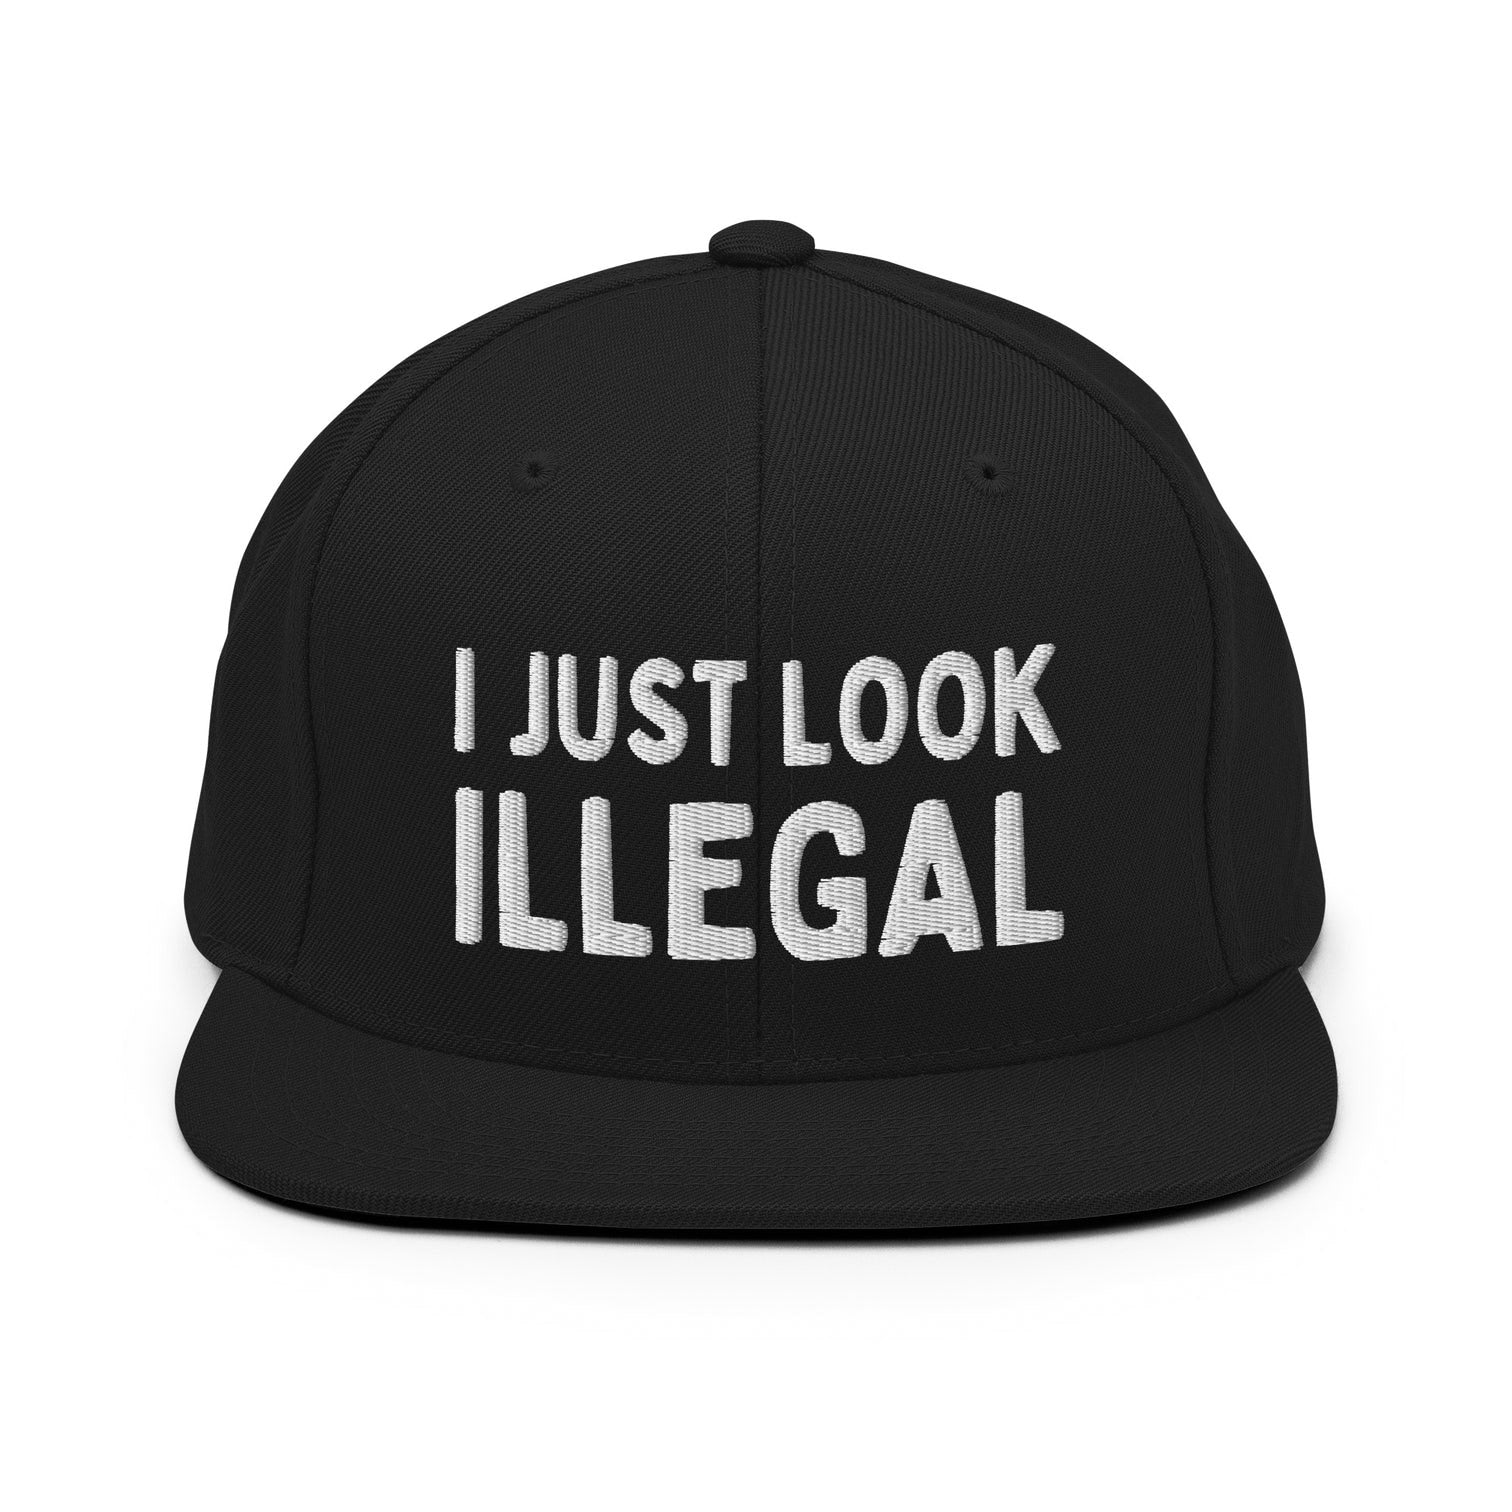 Black OG snapback cap baseball hat with embroidered white letters that say, "I JUST LOOK ILLEGAL"